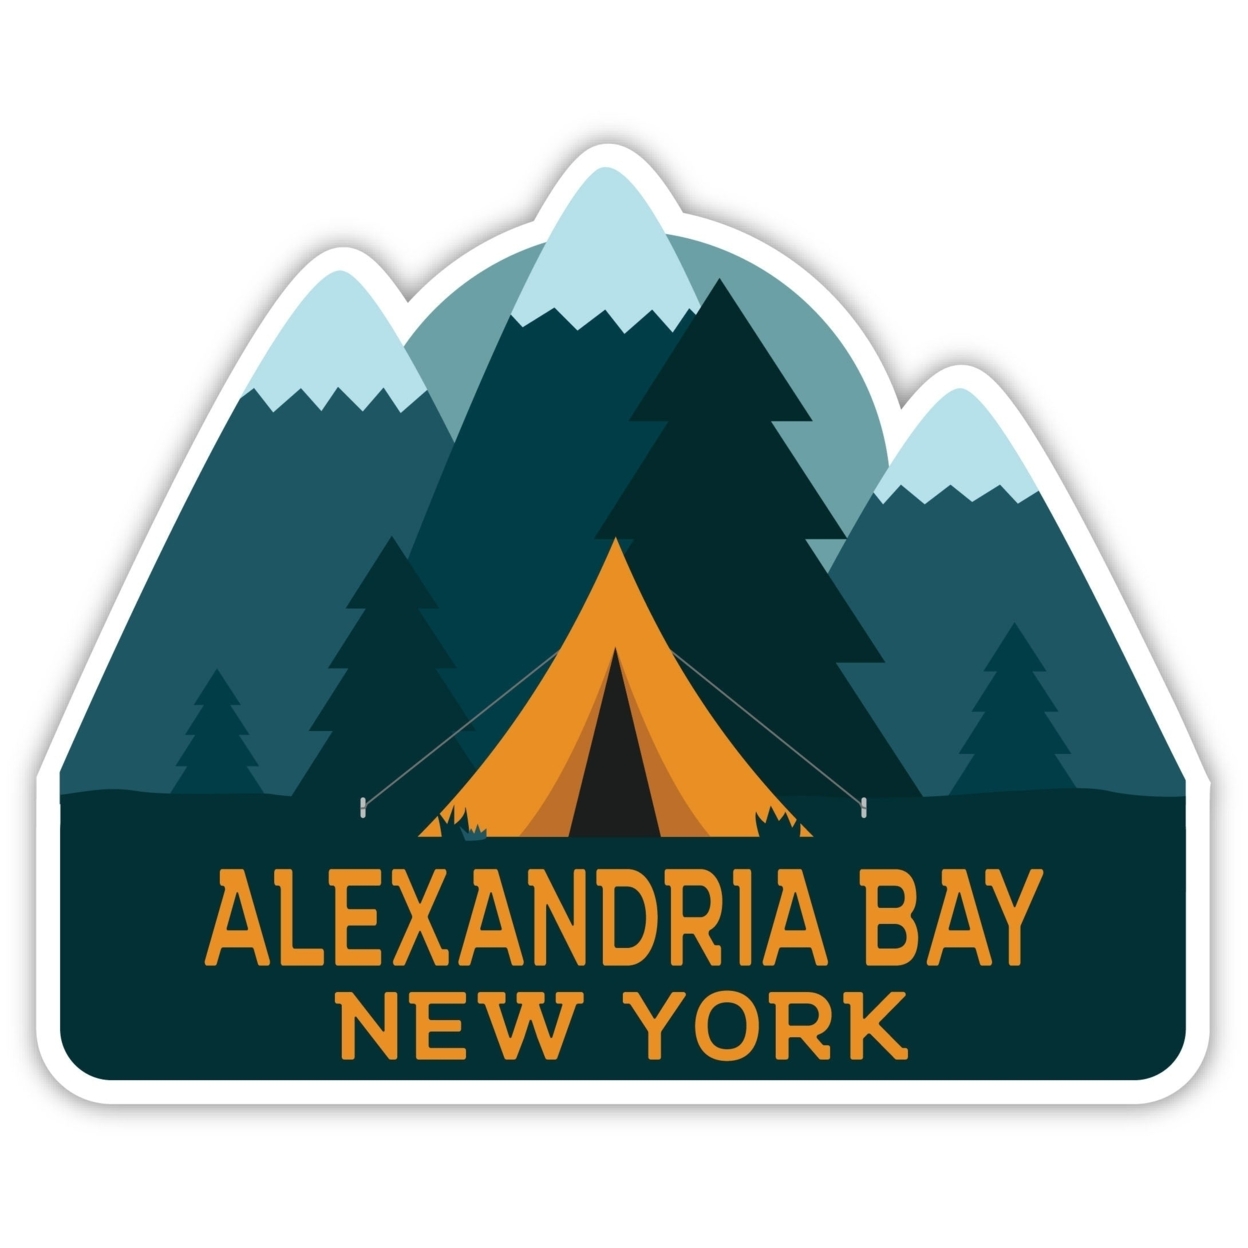 Alexandria Bay New York Souvenir Decorative Stickers (Choose Theme And Size) - 4-Pack, 4-Inch, Bear